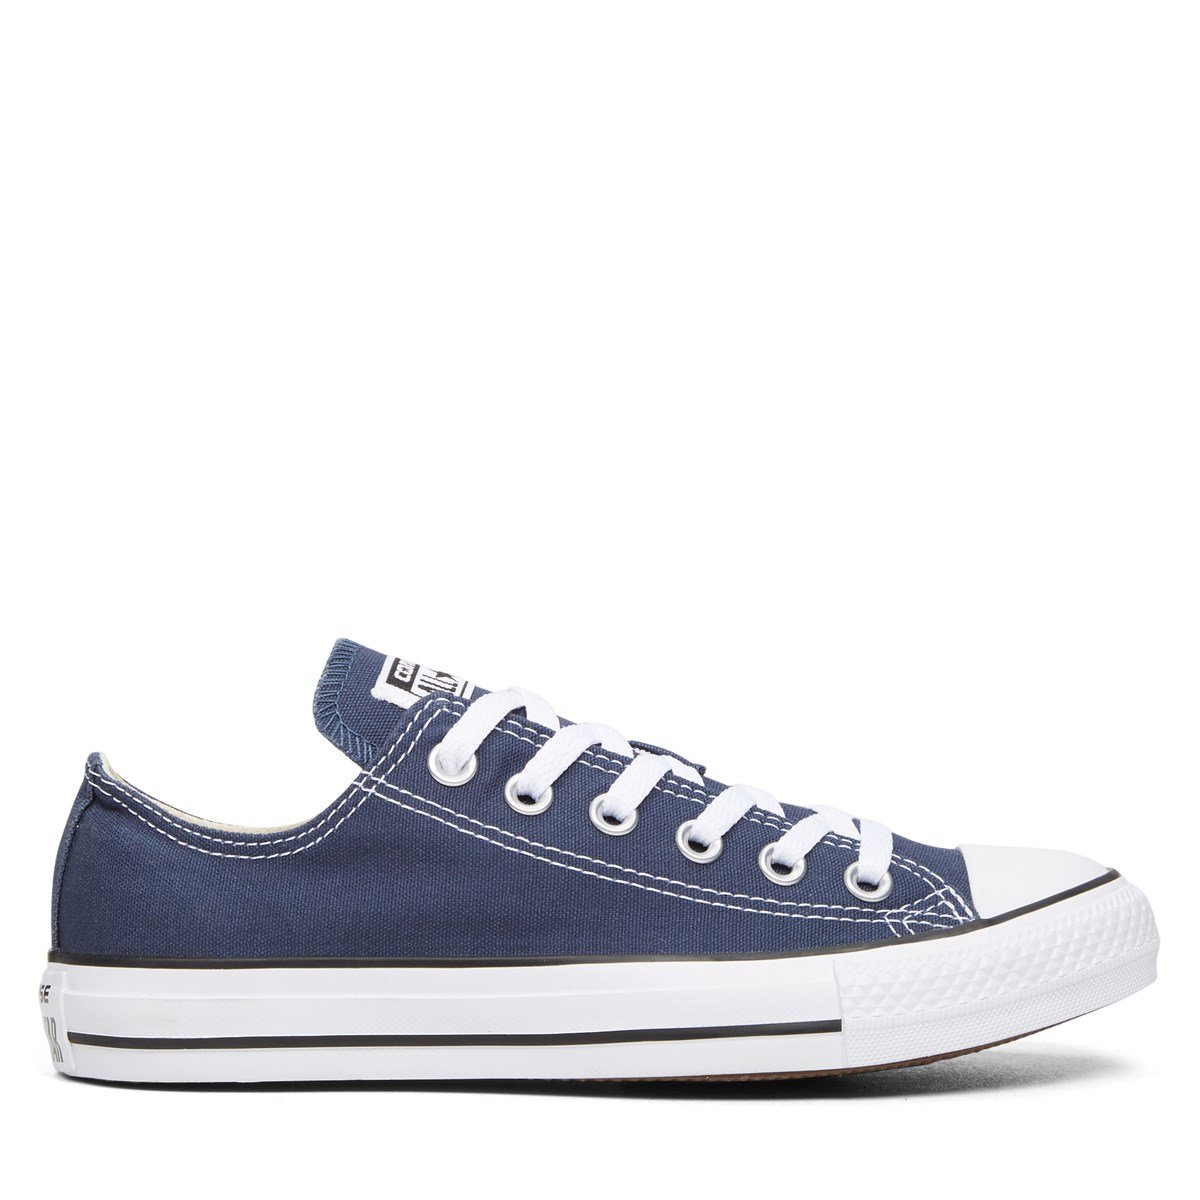 Women's Chuck Taylor All Star Low Top Sneakers in Navy